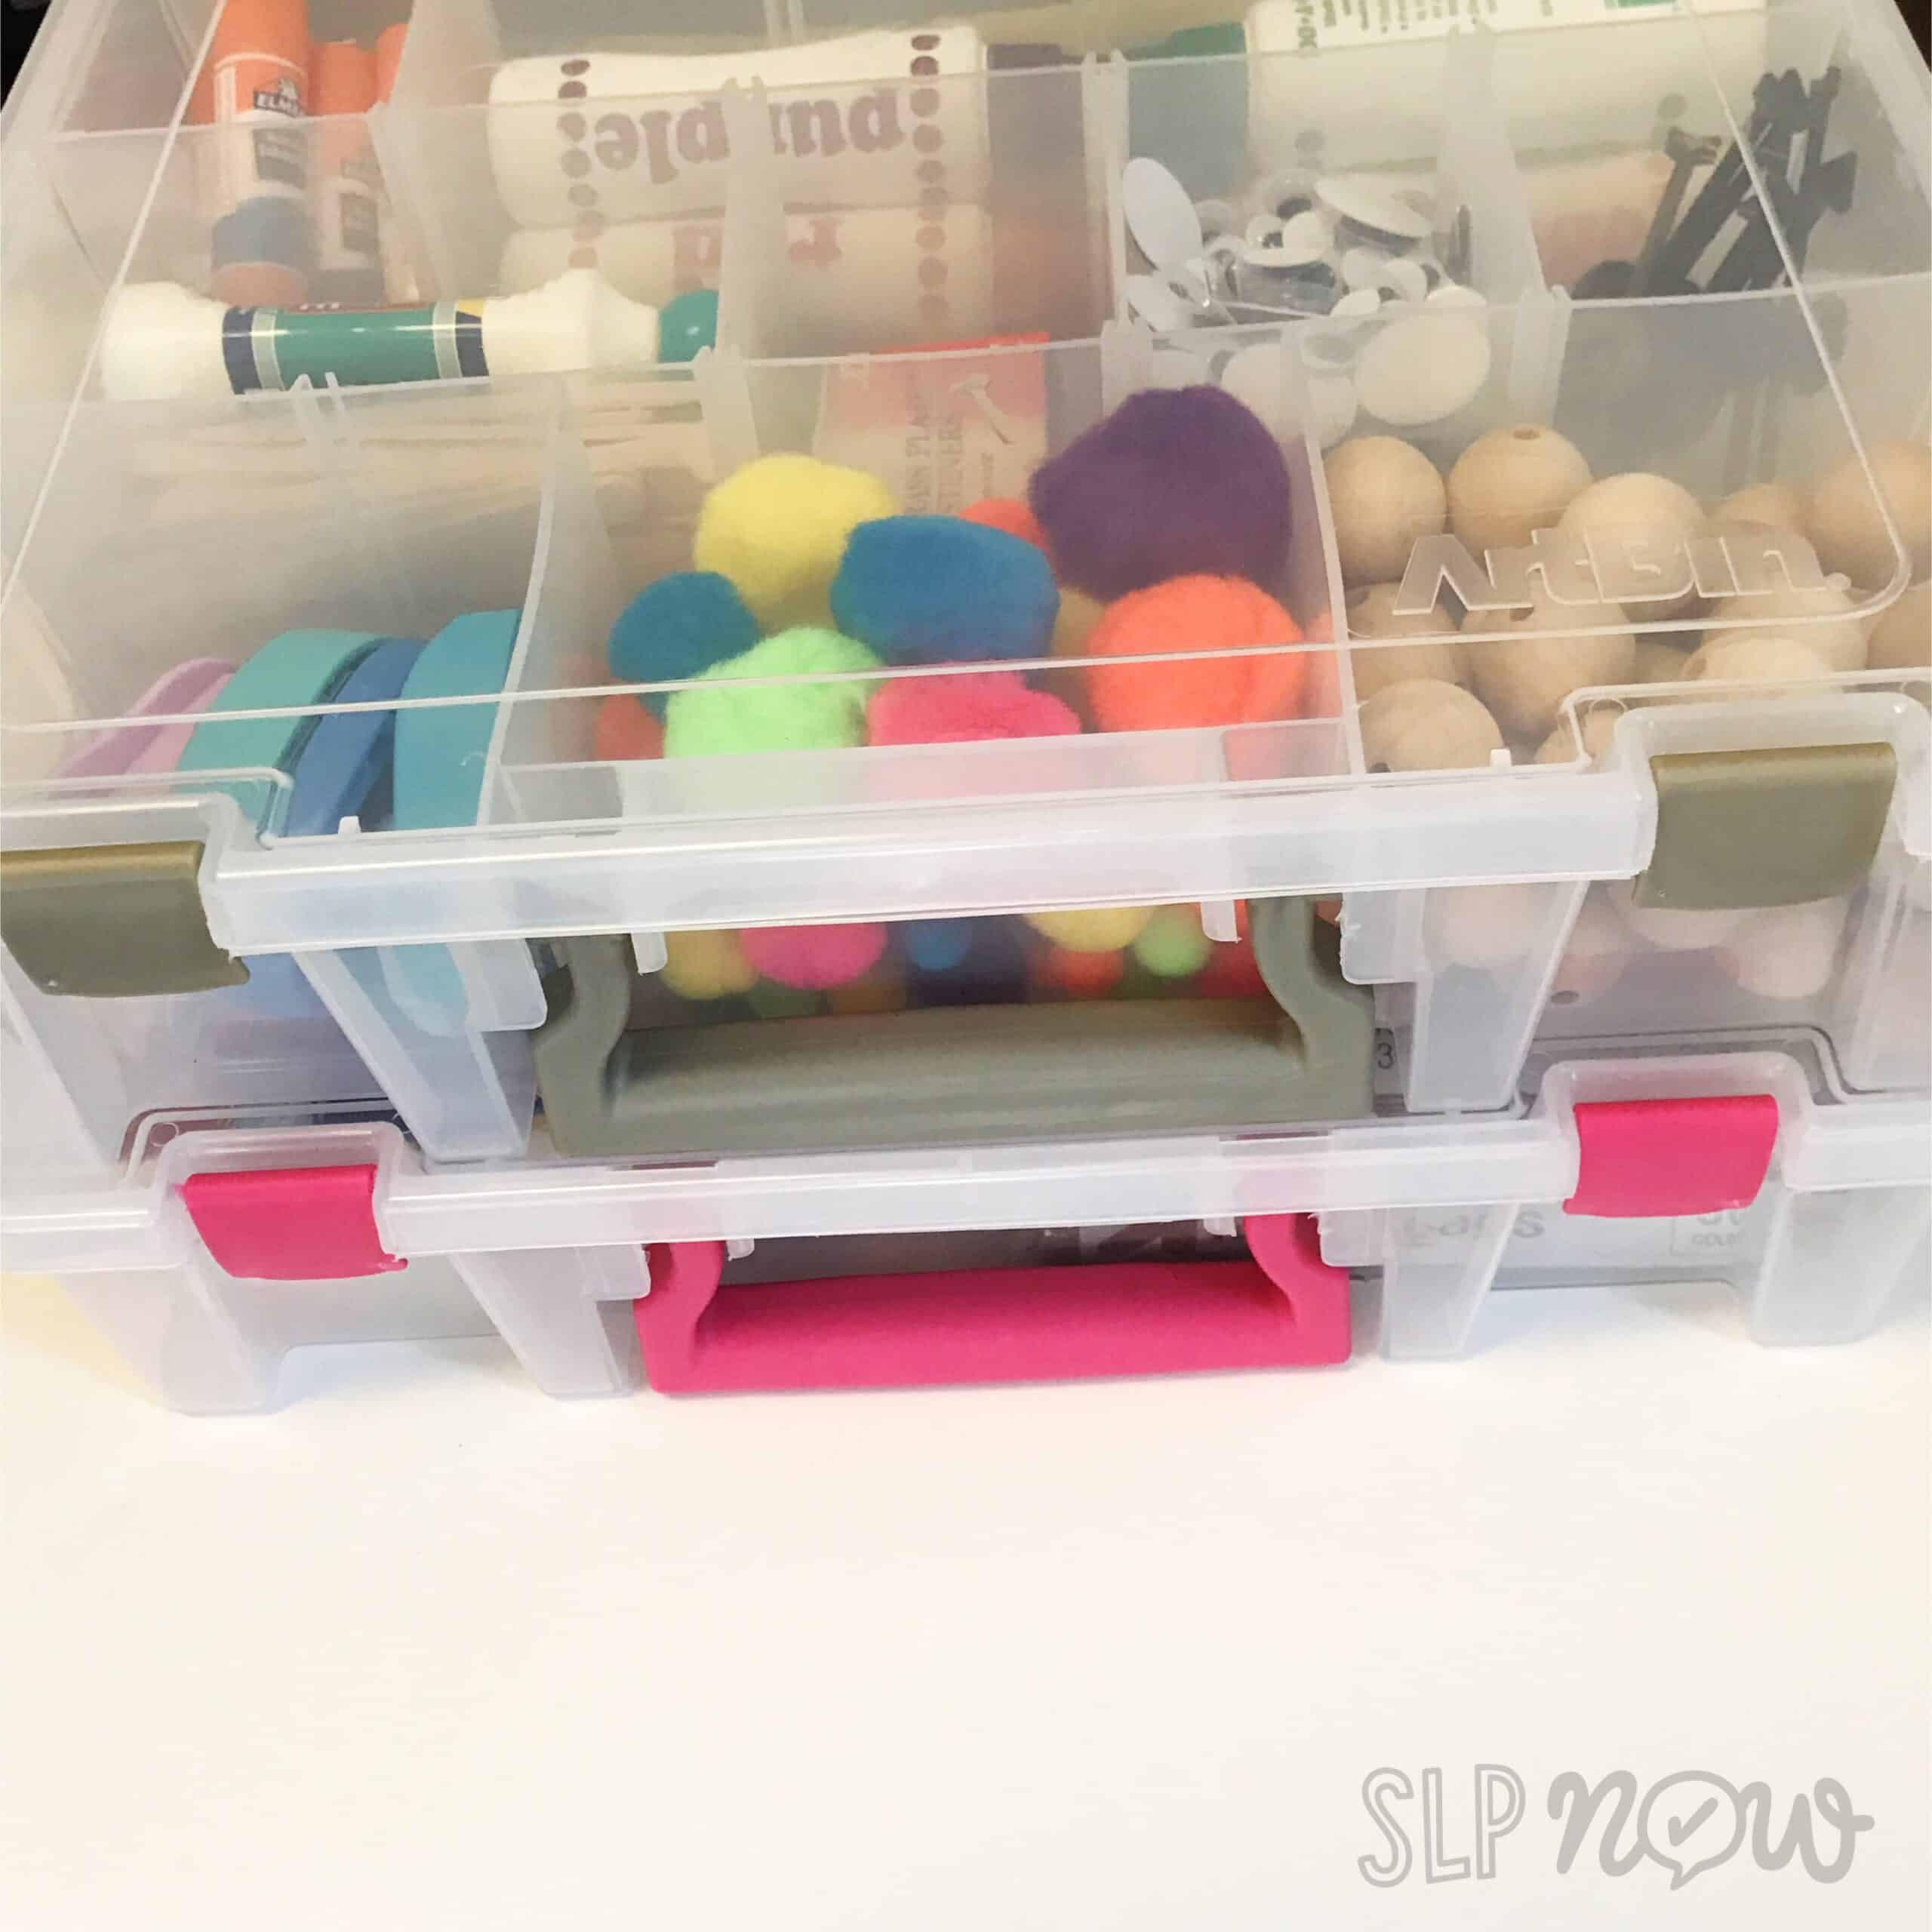 Struggling to keep your craft materials organized? Check out this post for an SLP's favorite tips and tools for craft organization!